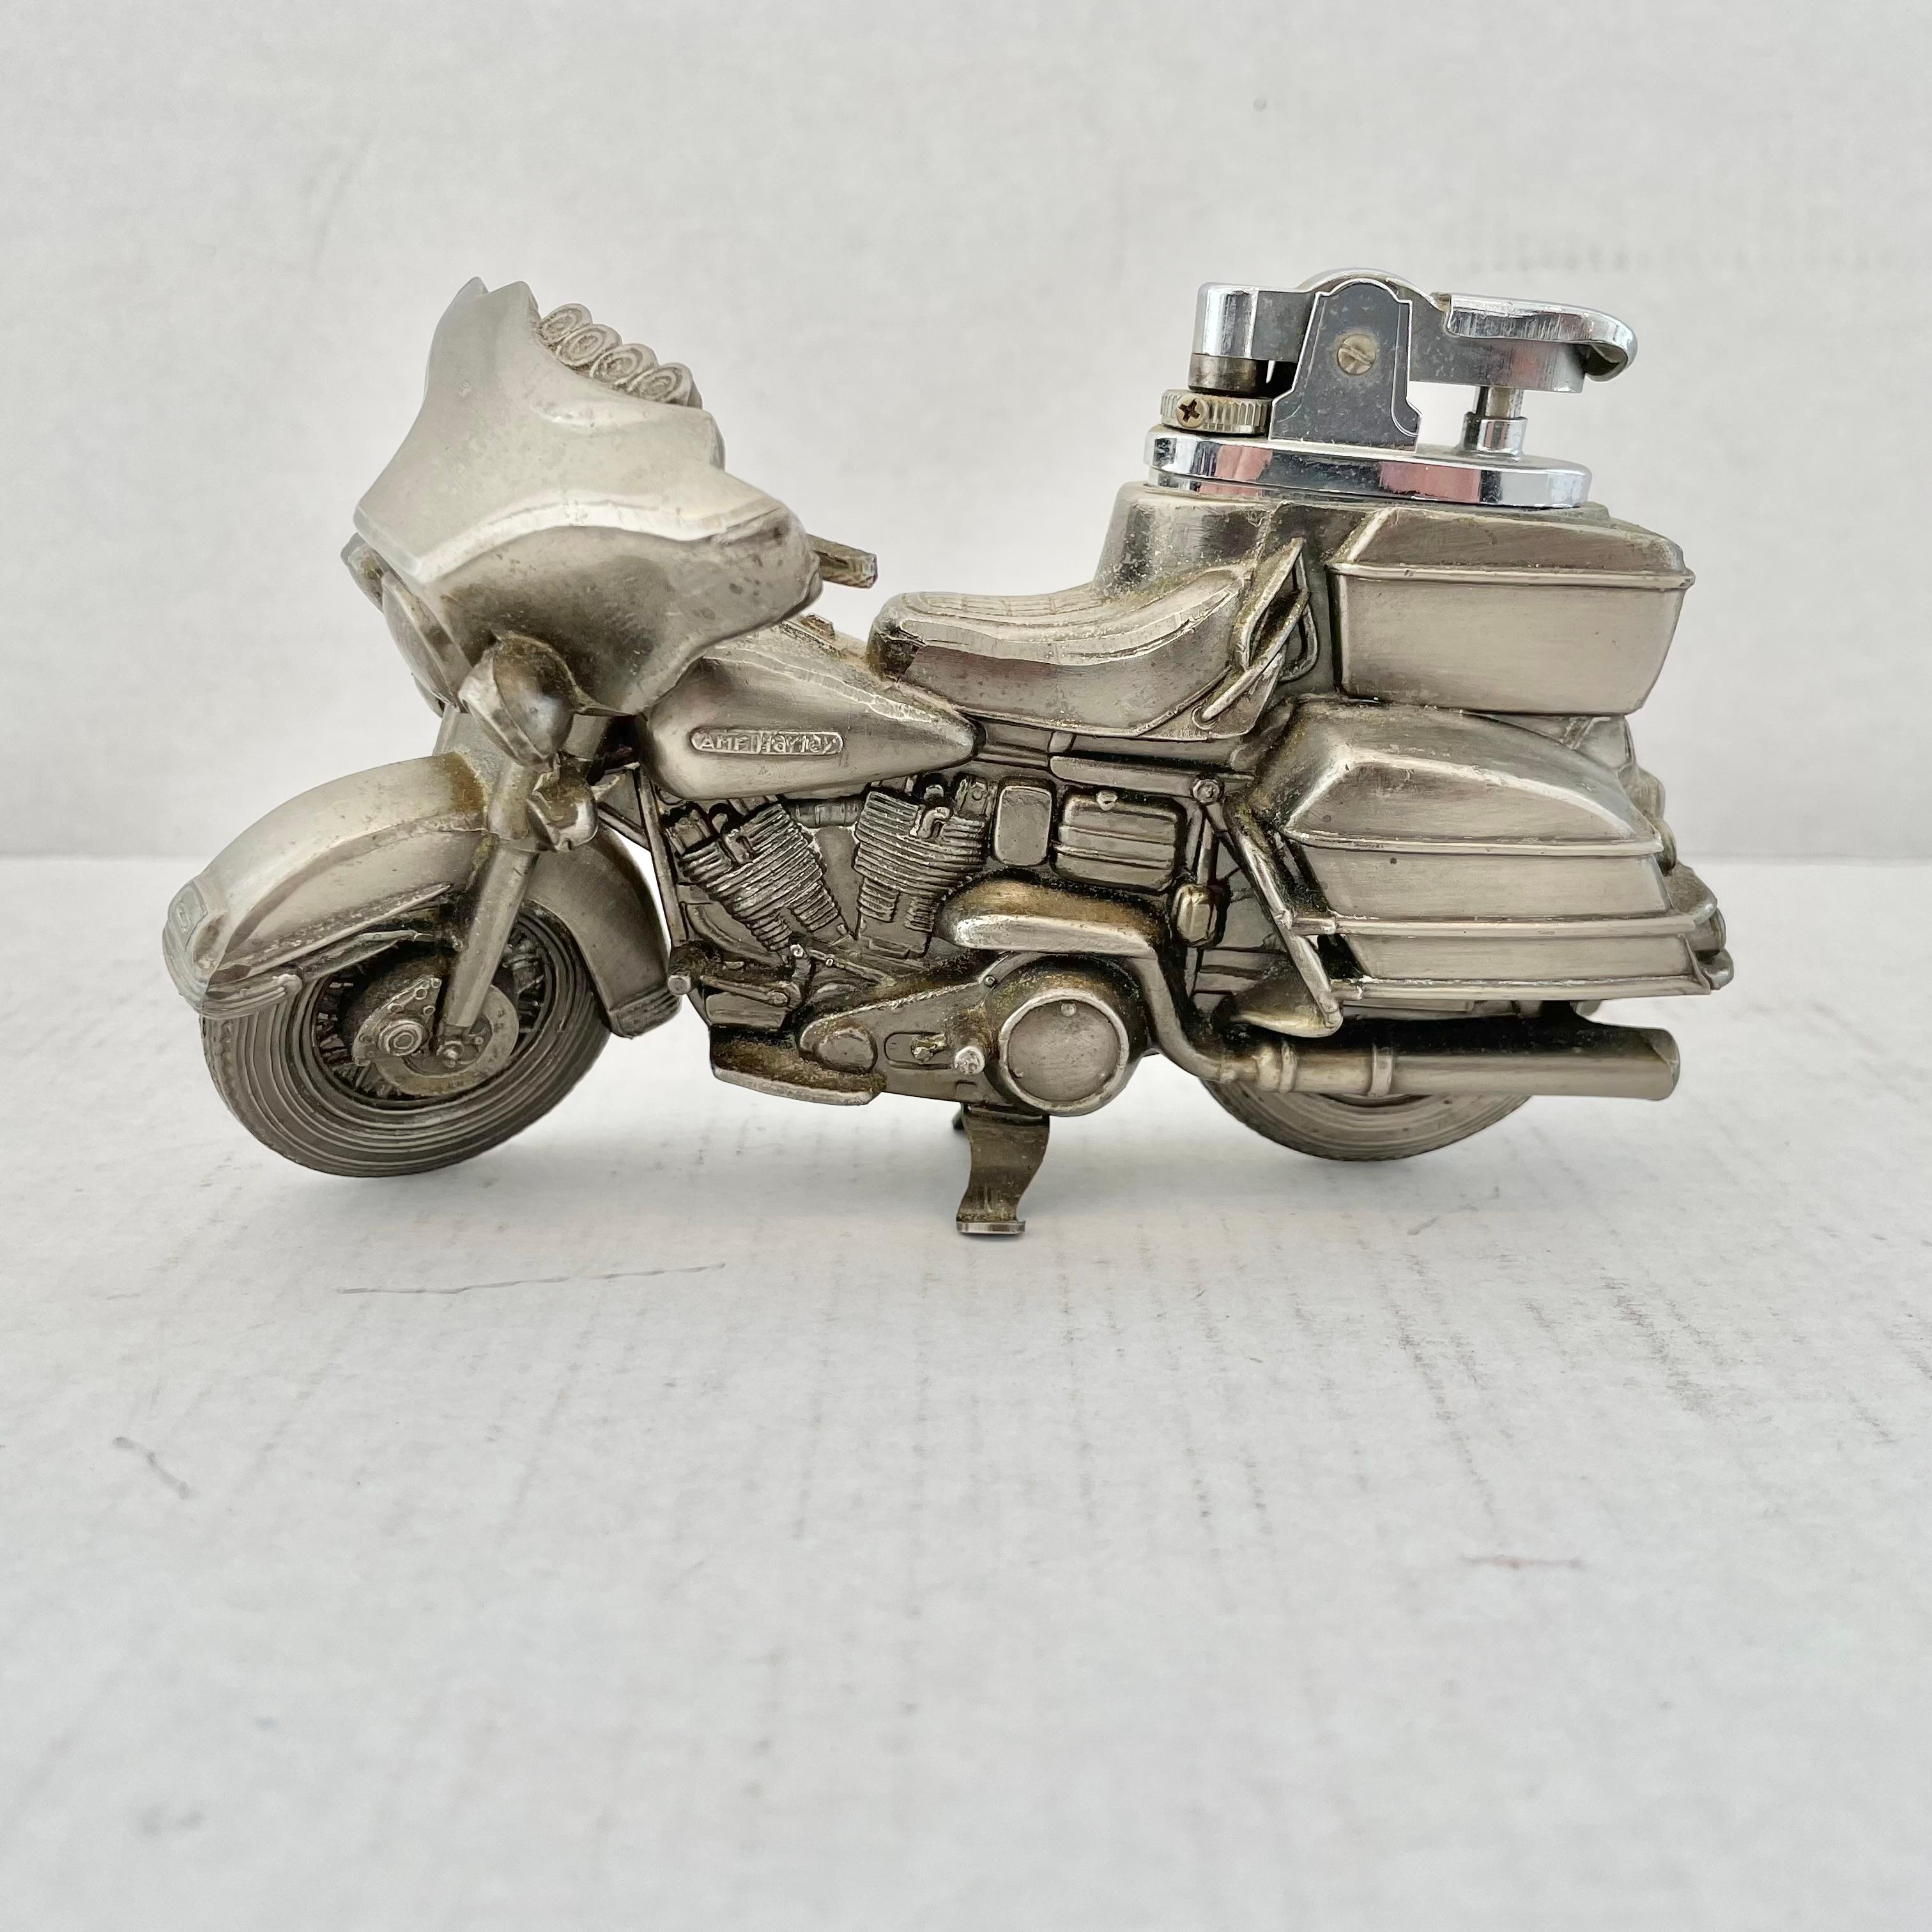 Cool vintage table lighter in the shape of a Harley Davidson Motorcycle. Made in Japan, 1980s. This piece has great balance and details. AMF Harley written on the gas tank and Japan written by the tail pipe. Cool tobacco accessory and conversation